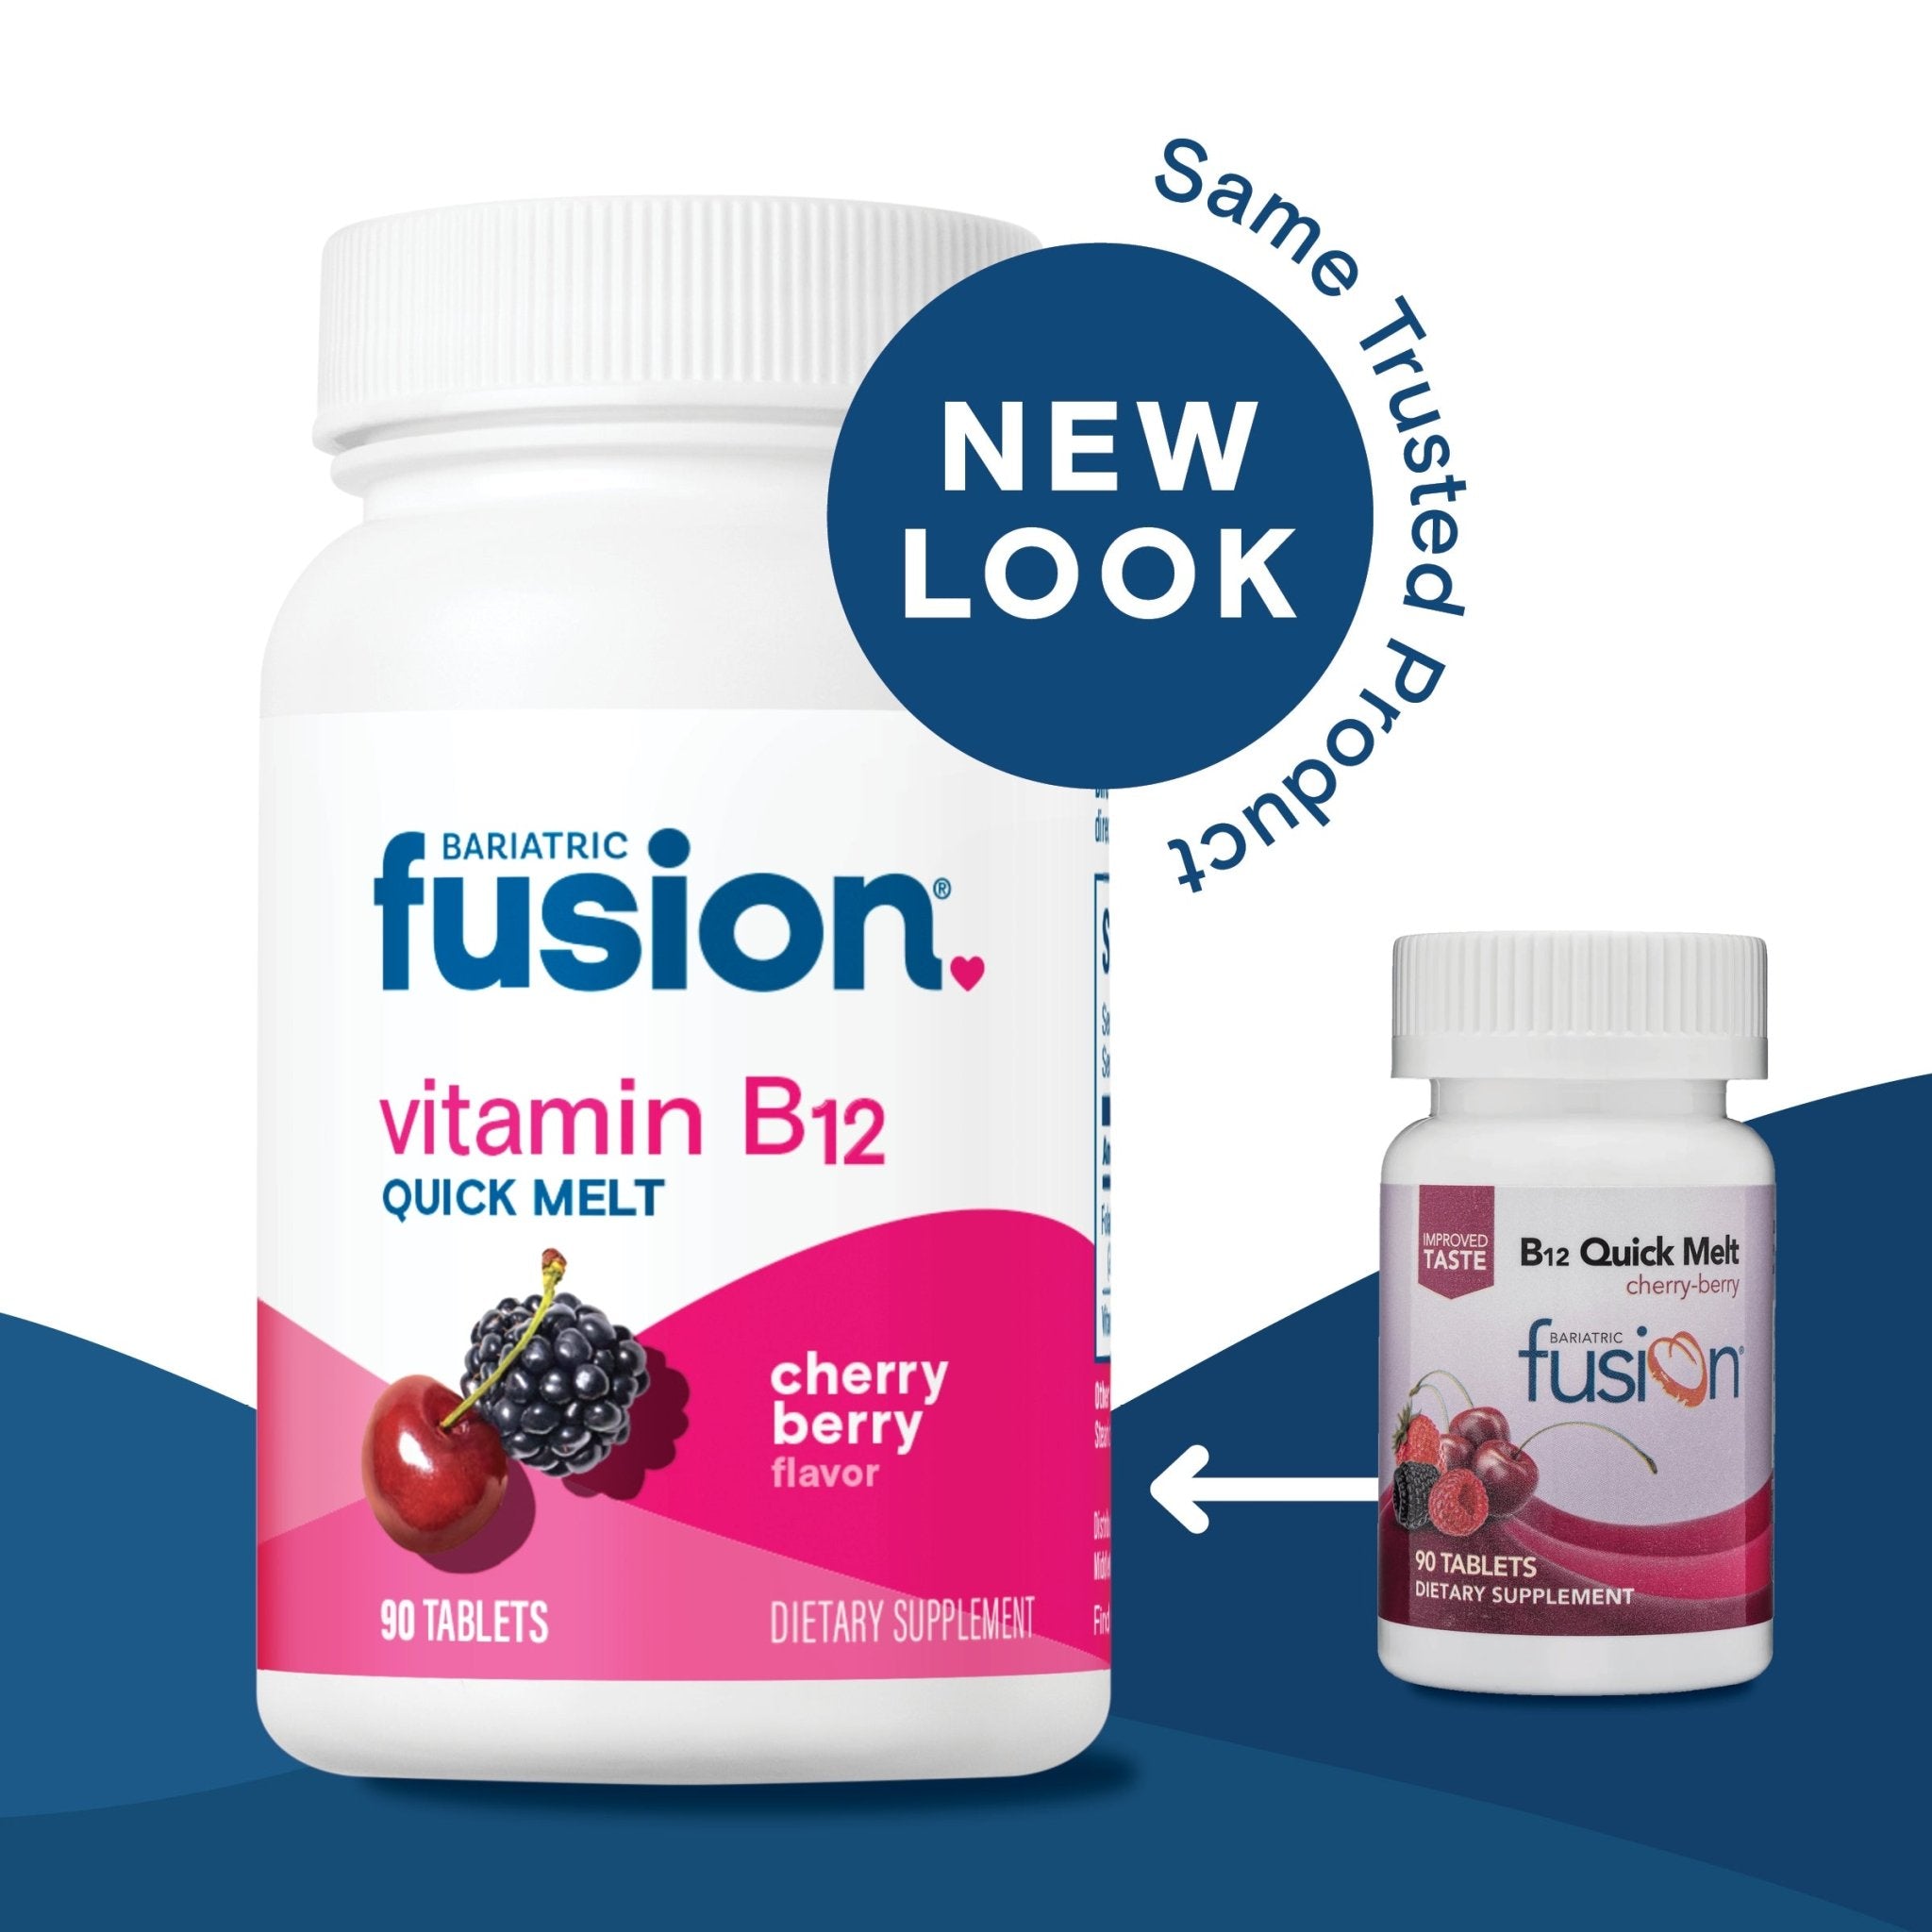 Bariatric Fusion Cherry-Berry Vitamin B12 Quick Melt new look, same trusted product.